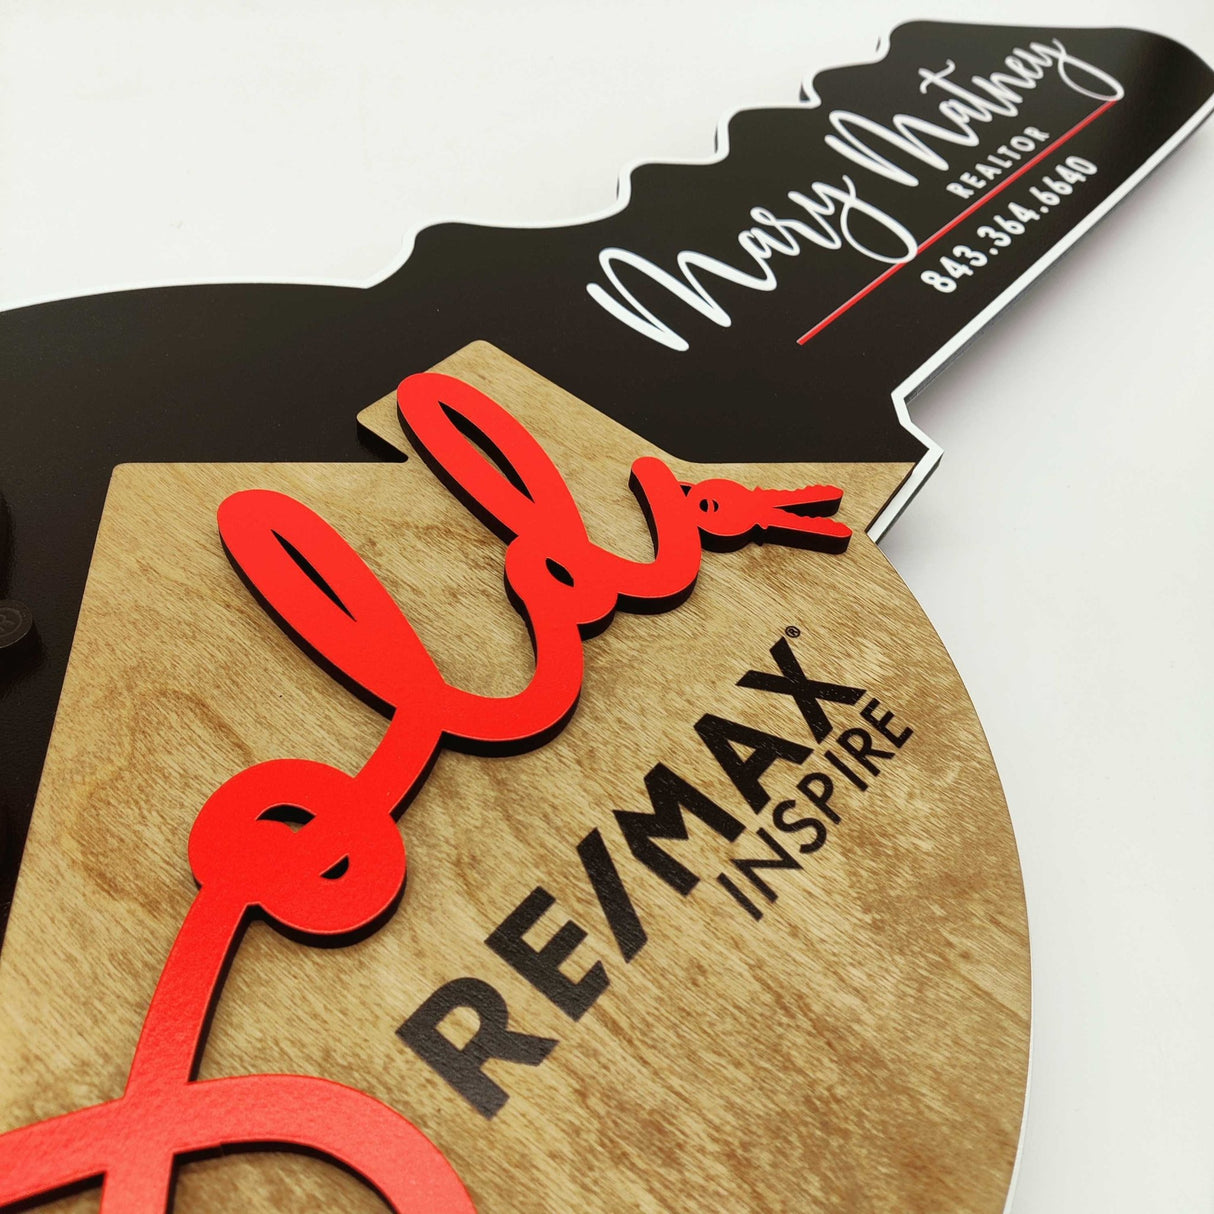 Round Shaped «Remax ‎Sold» Black Round Key Sign - Real Estate Store